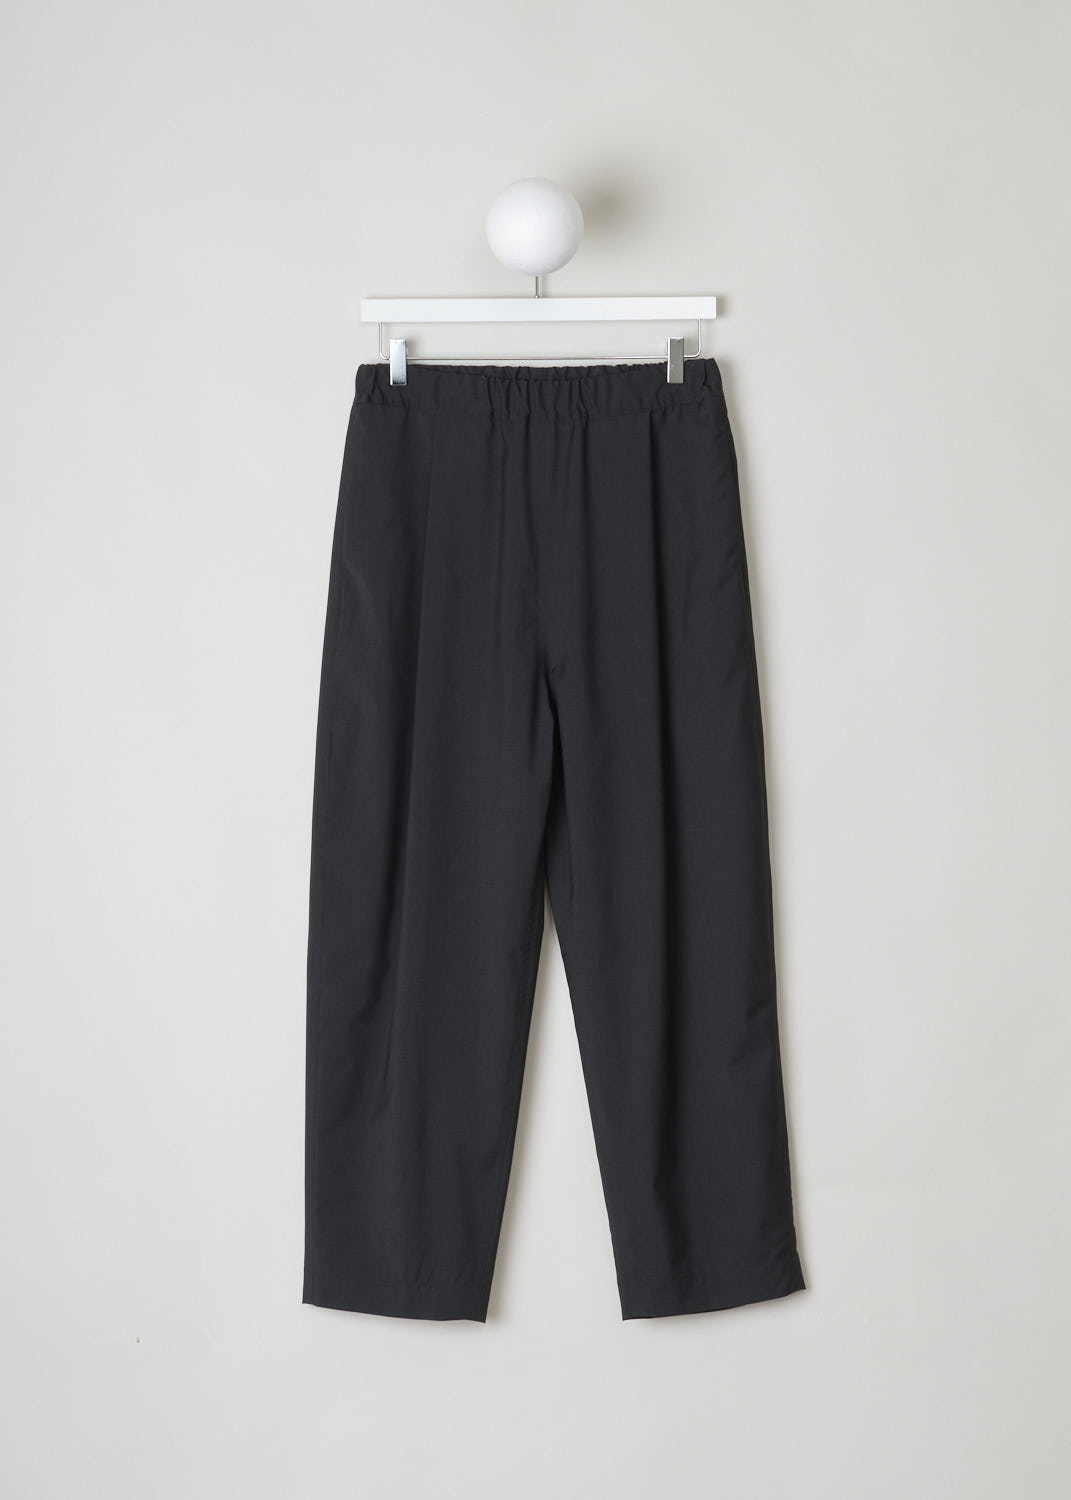 SOFIE Dâ€™HOORE, CHARCOAL PANTS WITH ELASTICATED WAISTBAND, S22_PATIENCE_WOOP_02_CHARCOAL, Grey, Front, These wool, charcoal colored pants have an elastic waistband with a white drawstring on the inside. Slanted pockets can be found on either side. In the back, a single patch pocket can be found. 
